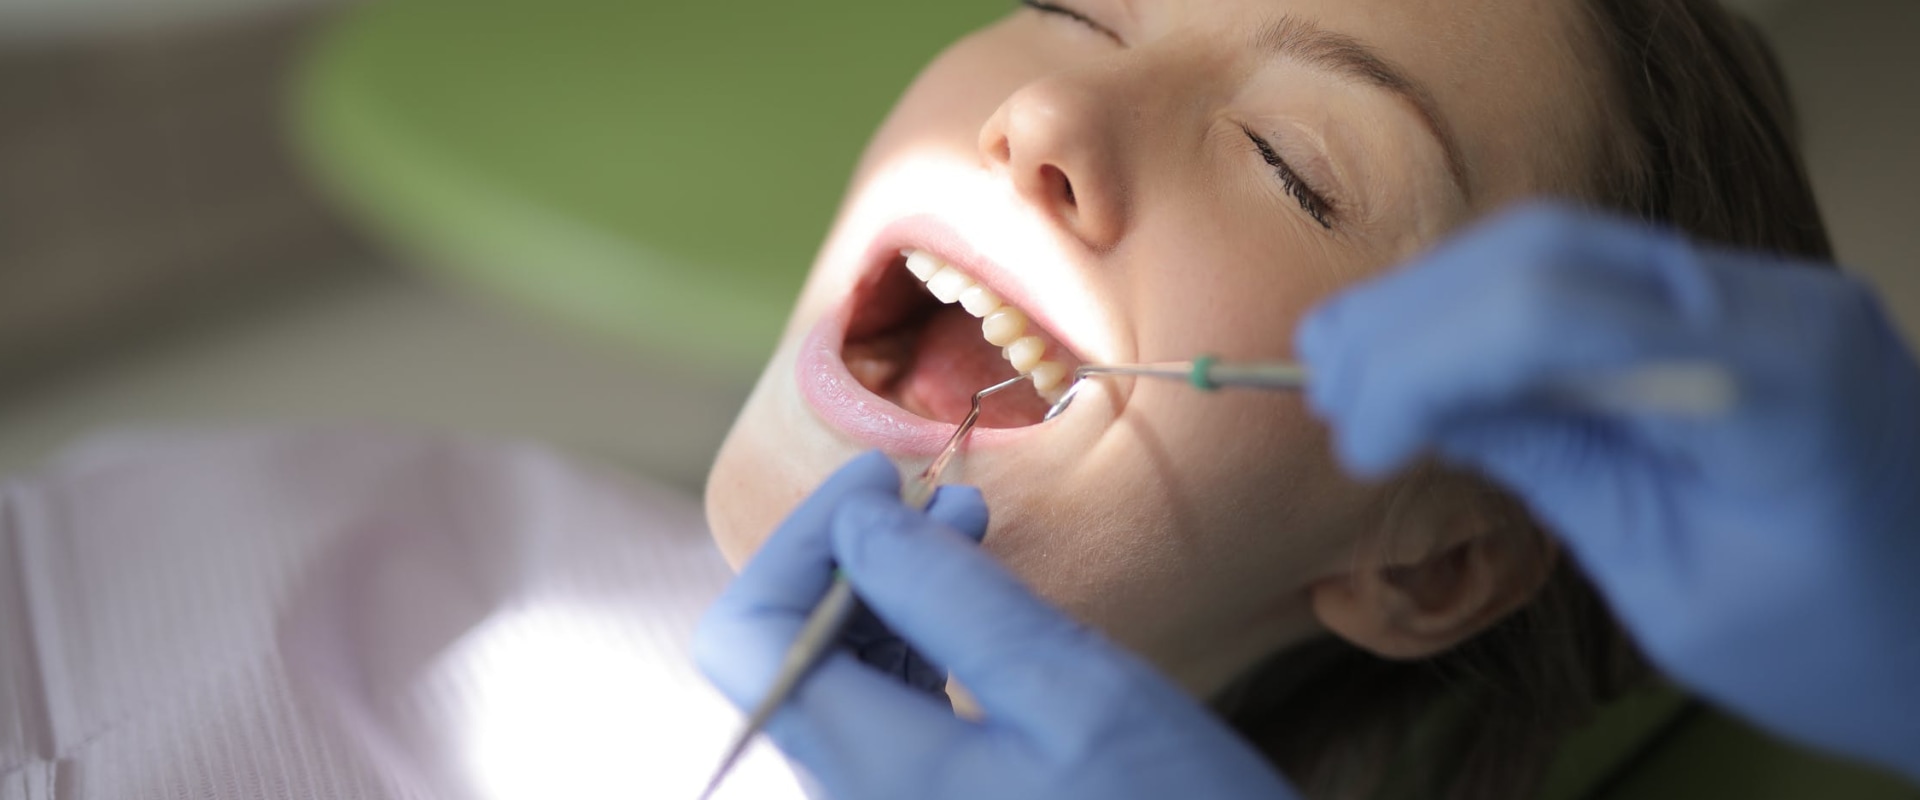 Can dental implants be painful?